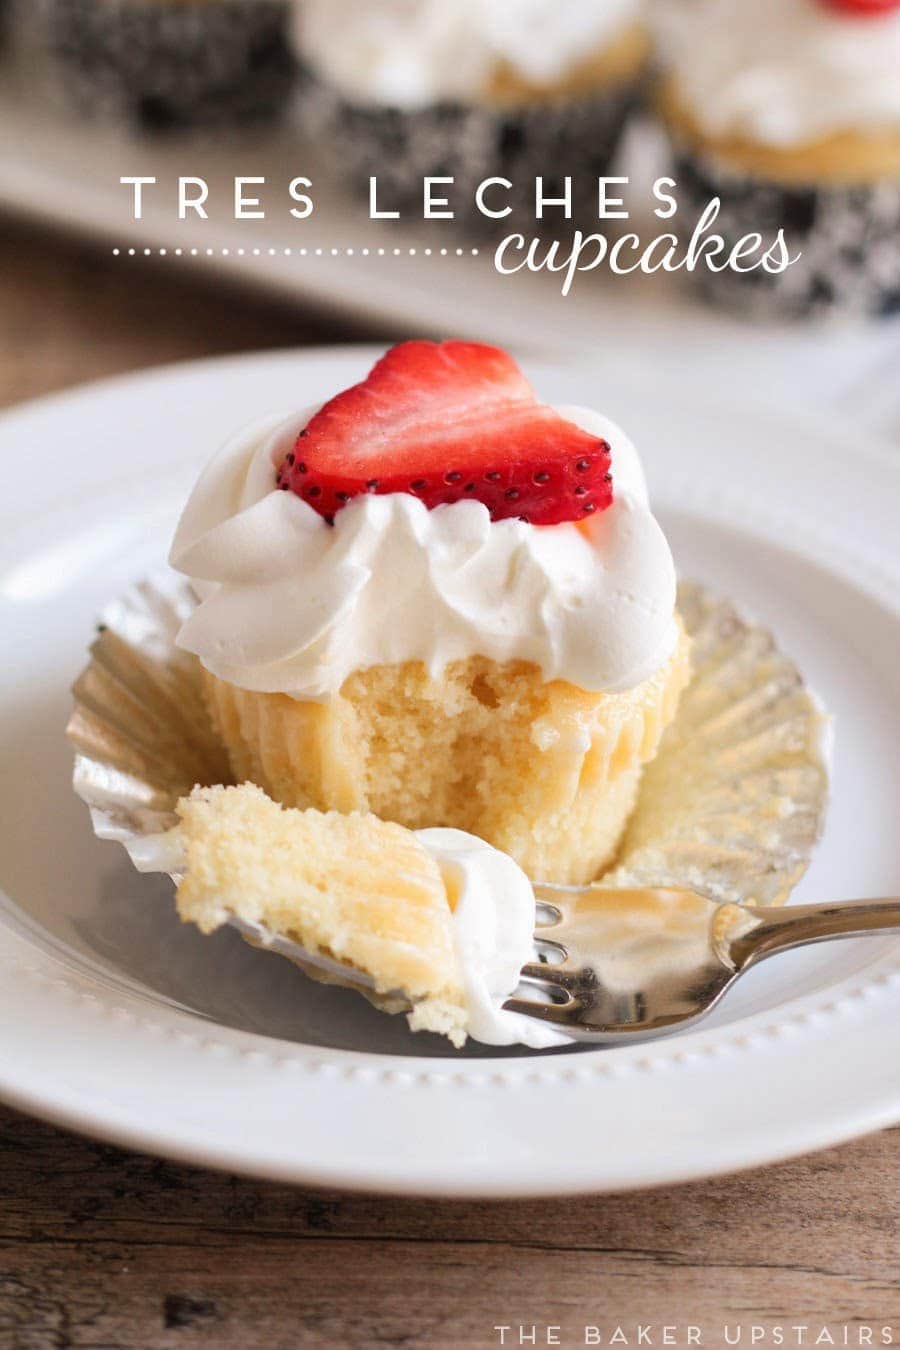 vanilla cupcake with white frosting, strawberry on top, a fork